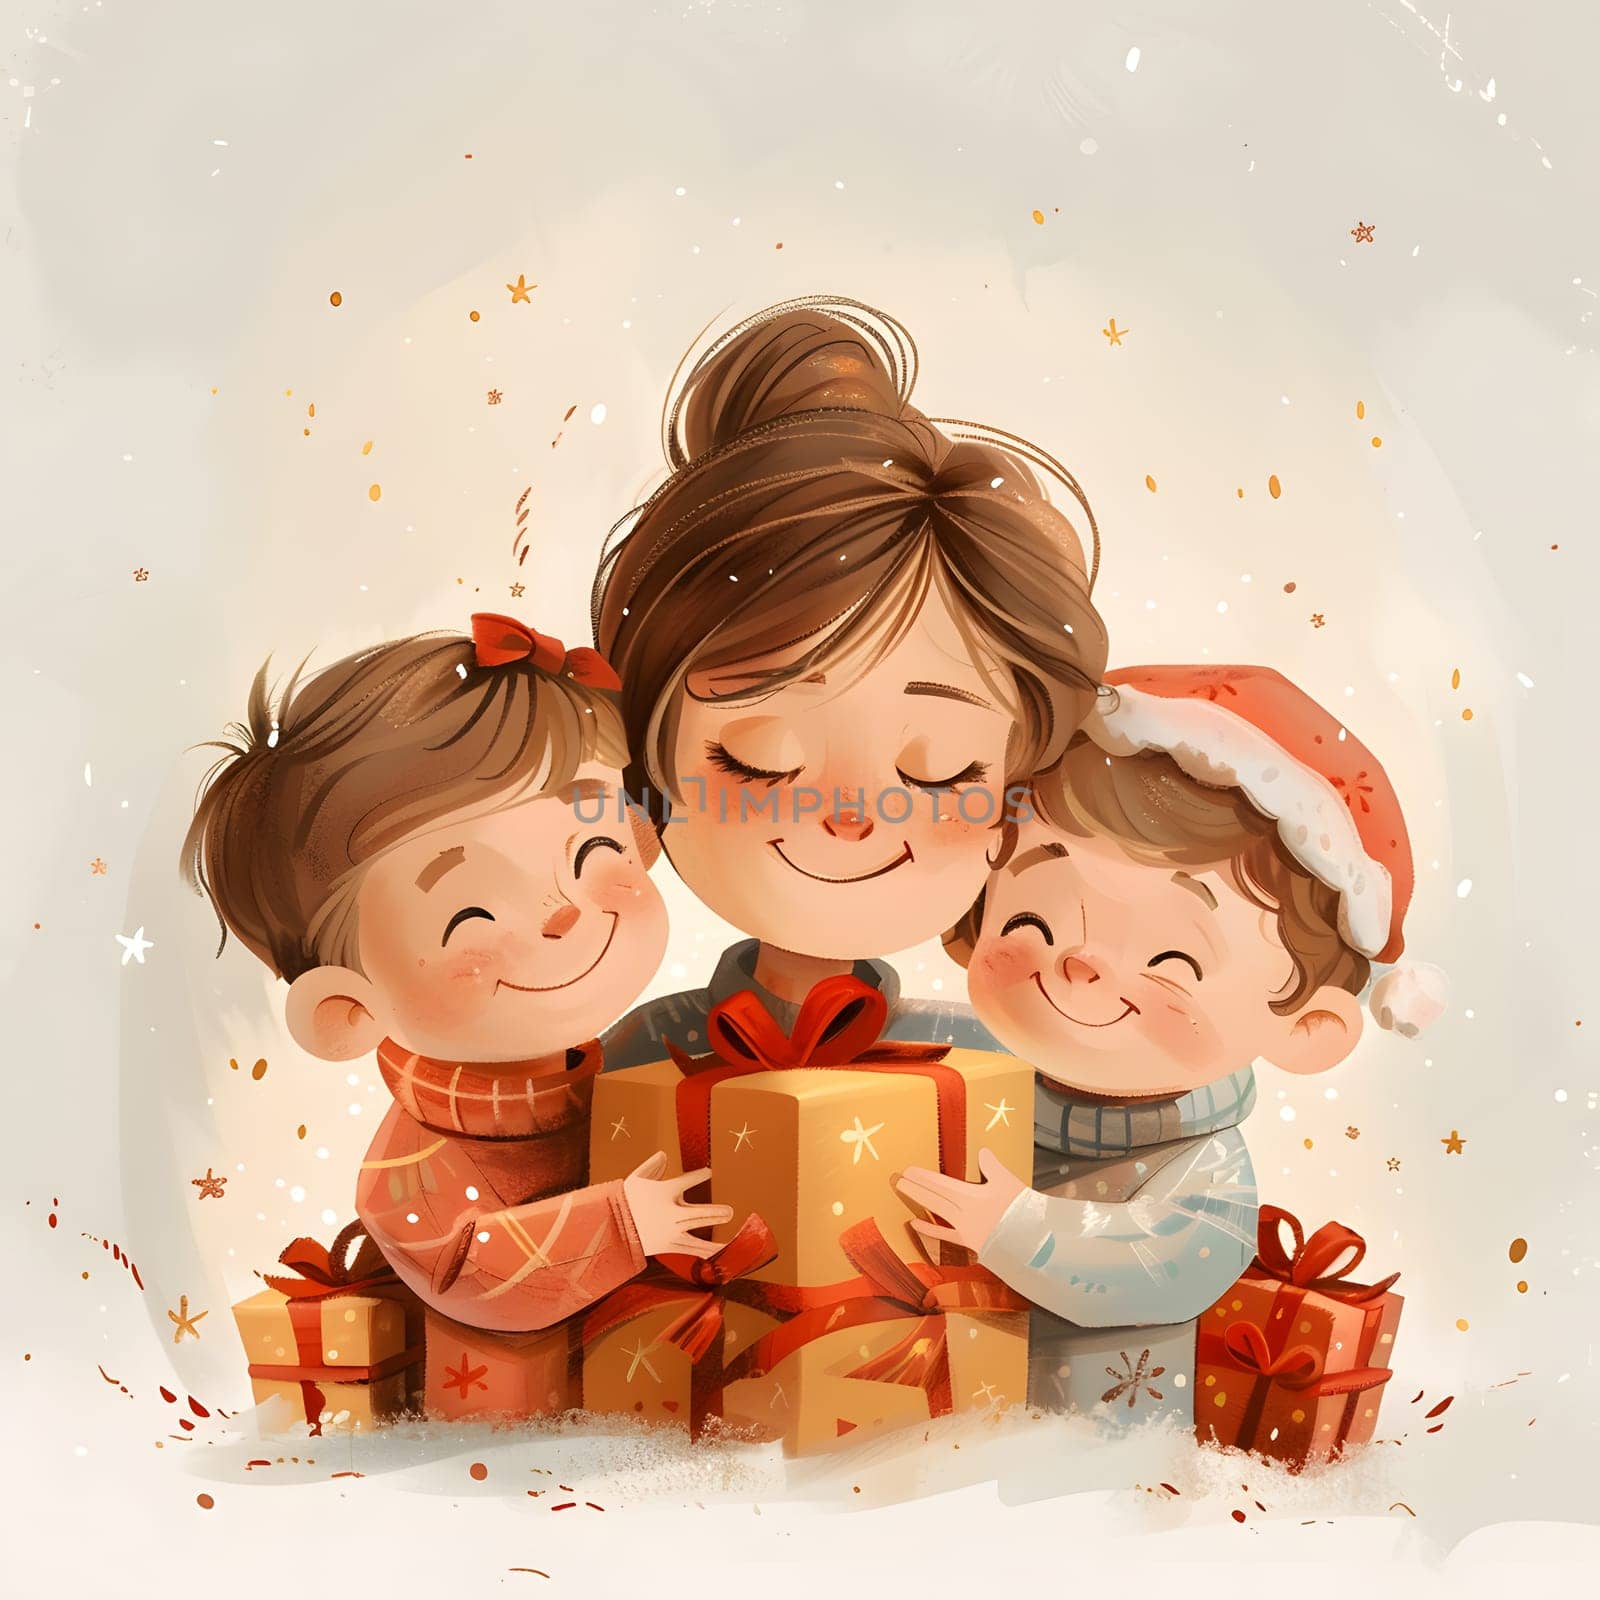 Happy family with Christmas gifts, in a festive gesture by Nadtochiy